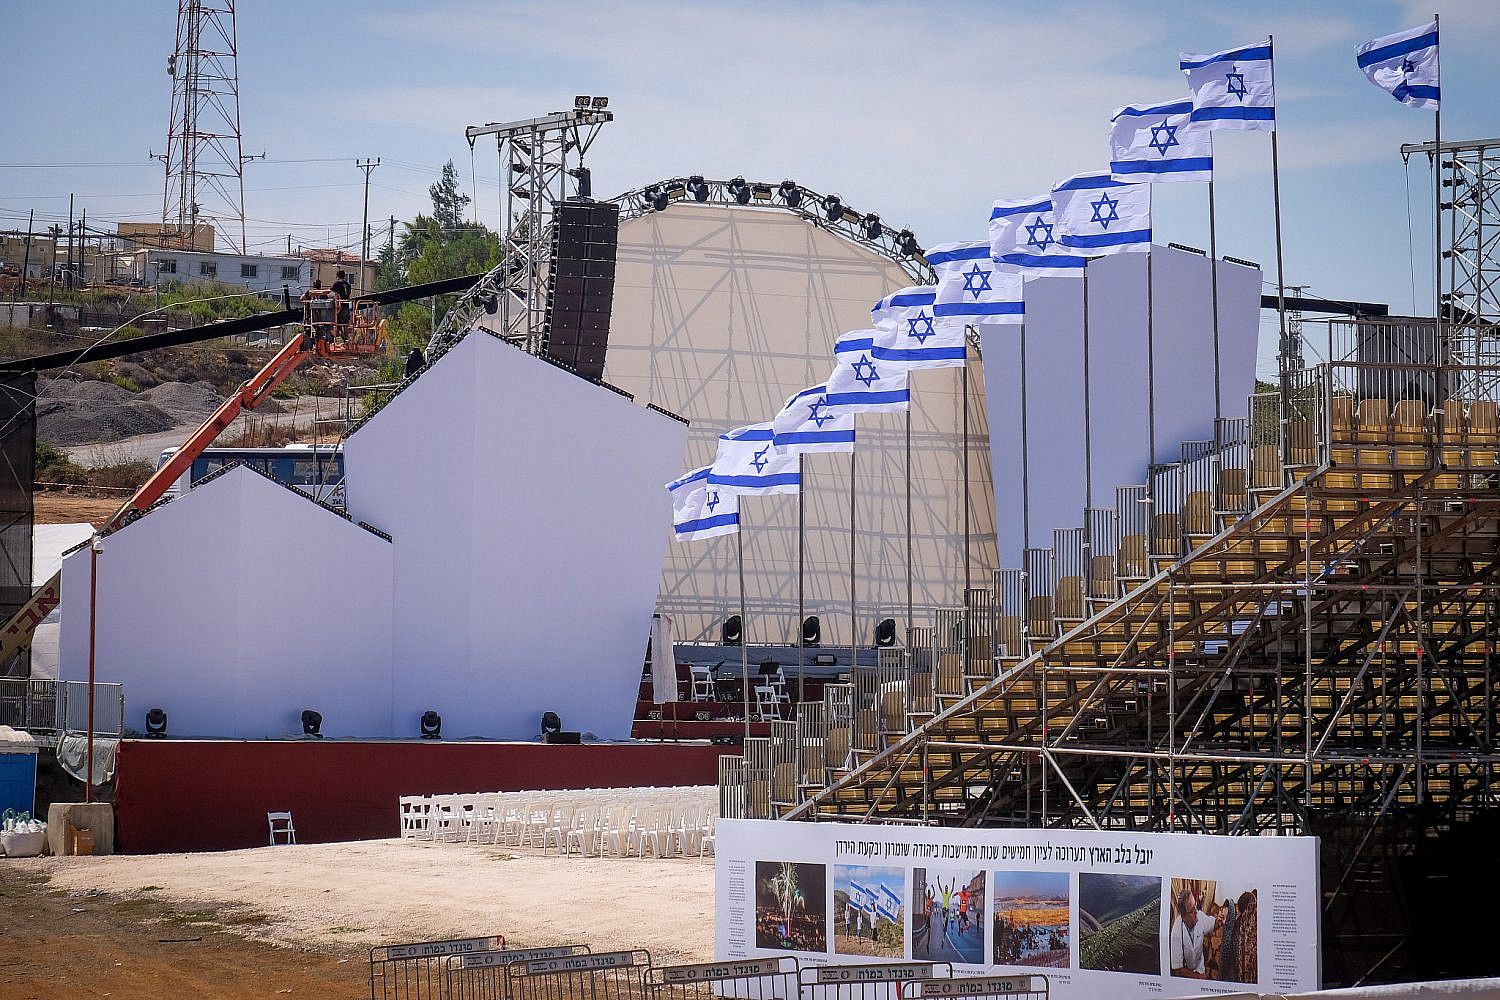 The site where the Jubilee Celebration of the 'Liberation of Judea, Samaria, the Jordan Valley and the Golan Heights' will take place in Kfar Etzion, in the West Bank, September 26, 2017. (Gershon Elinson/Flash90)